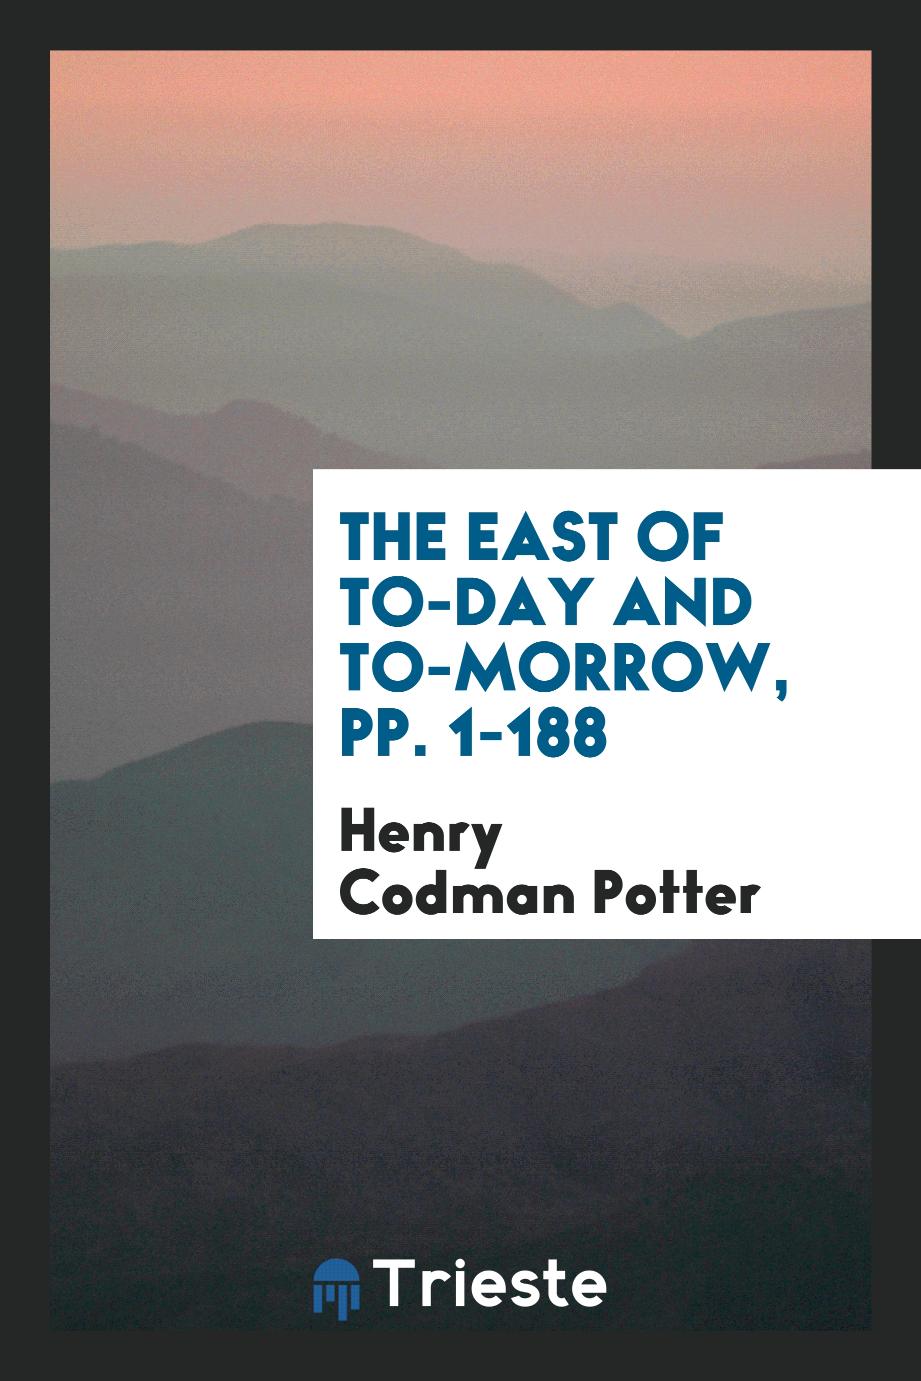 Henry Codman Potter - The East of To-Day and To-Morrow, pp. 1-188